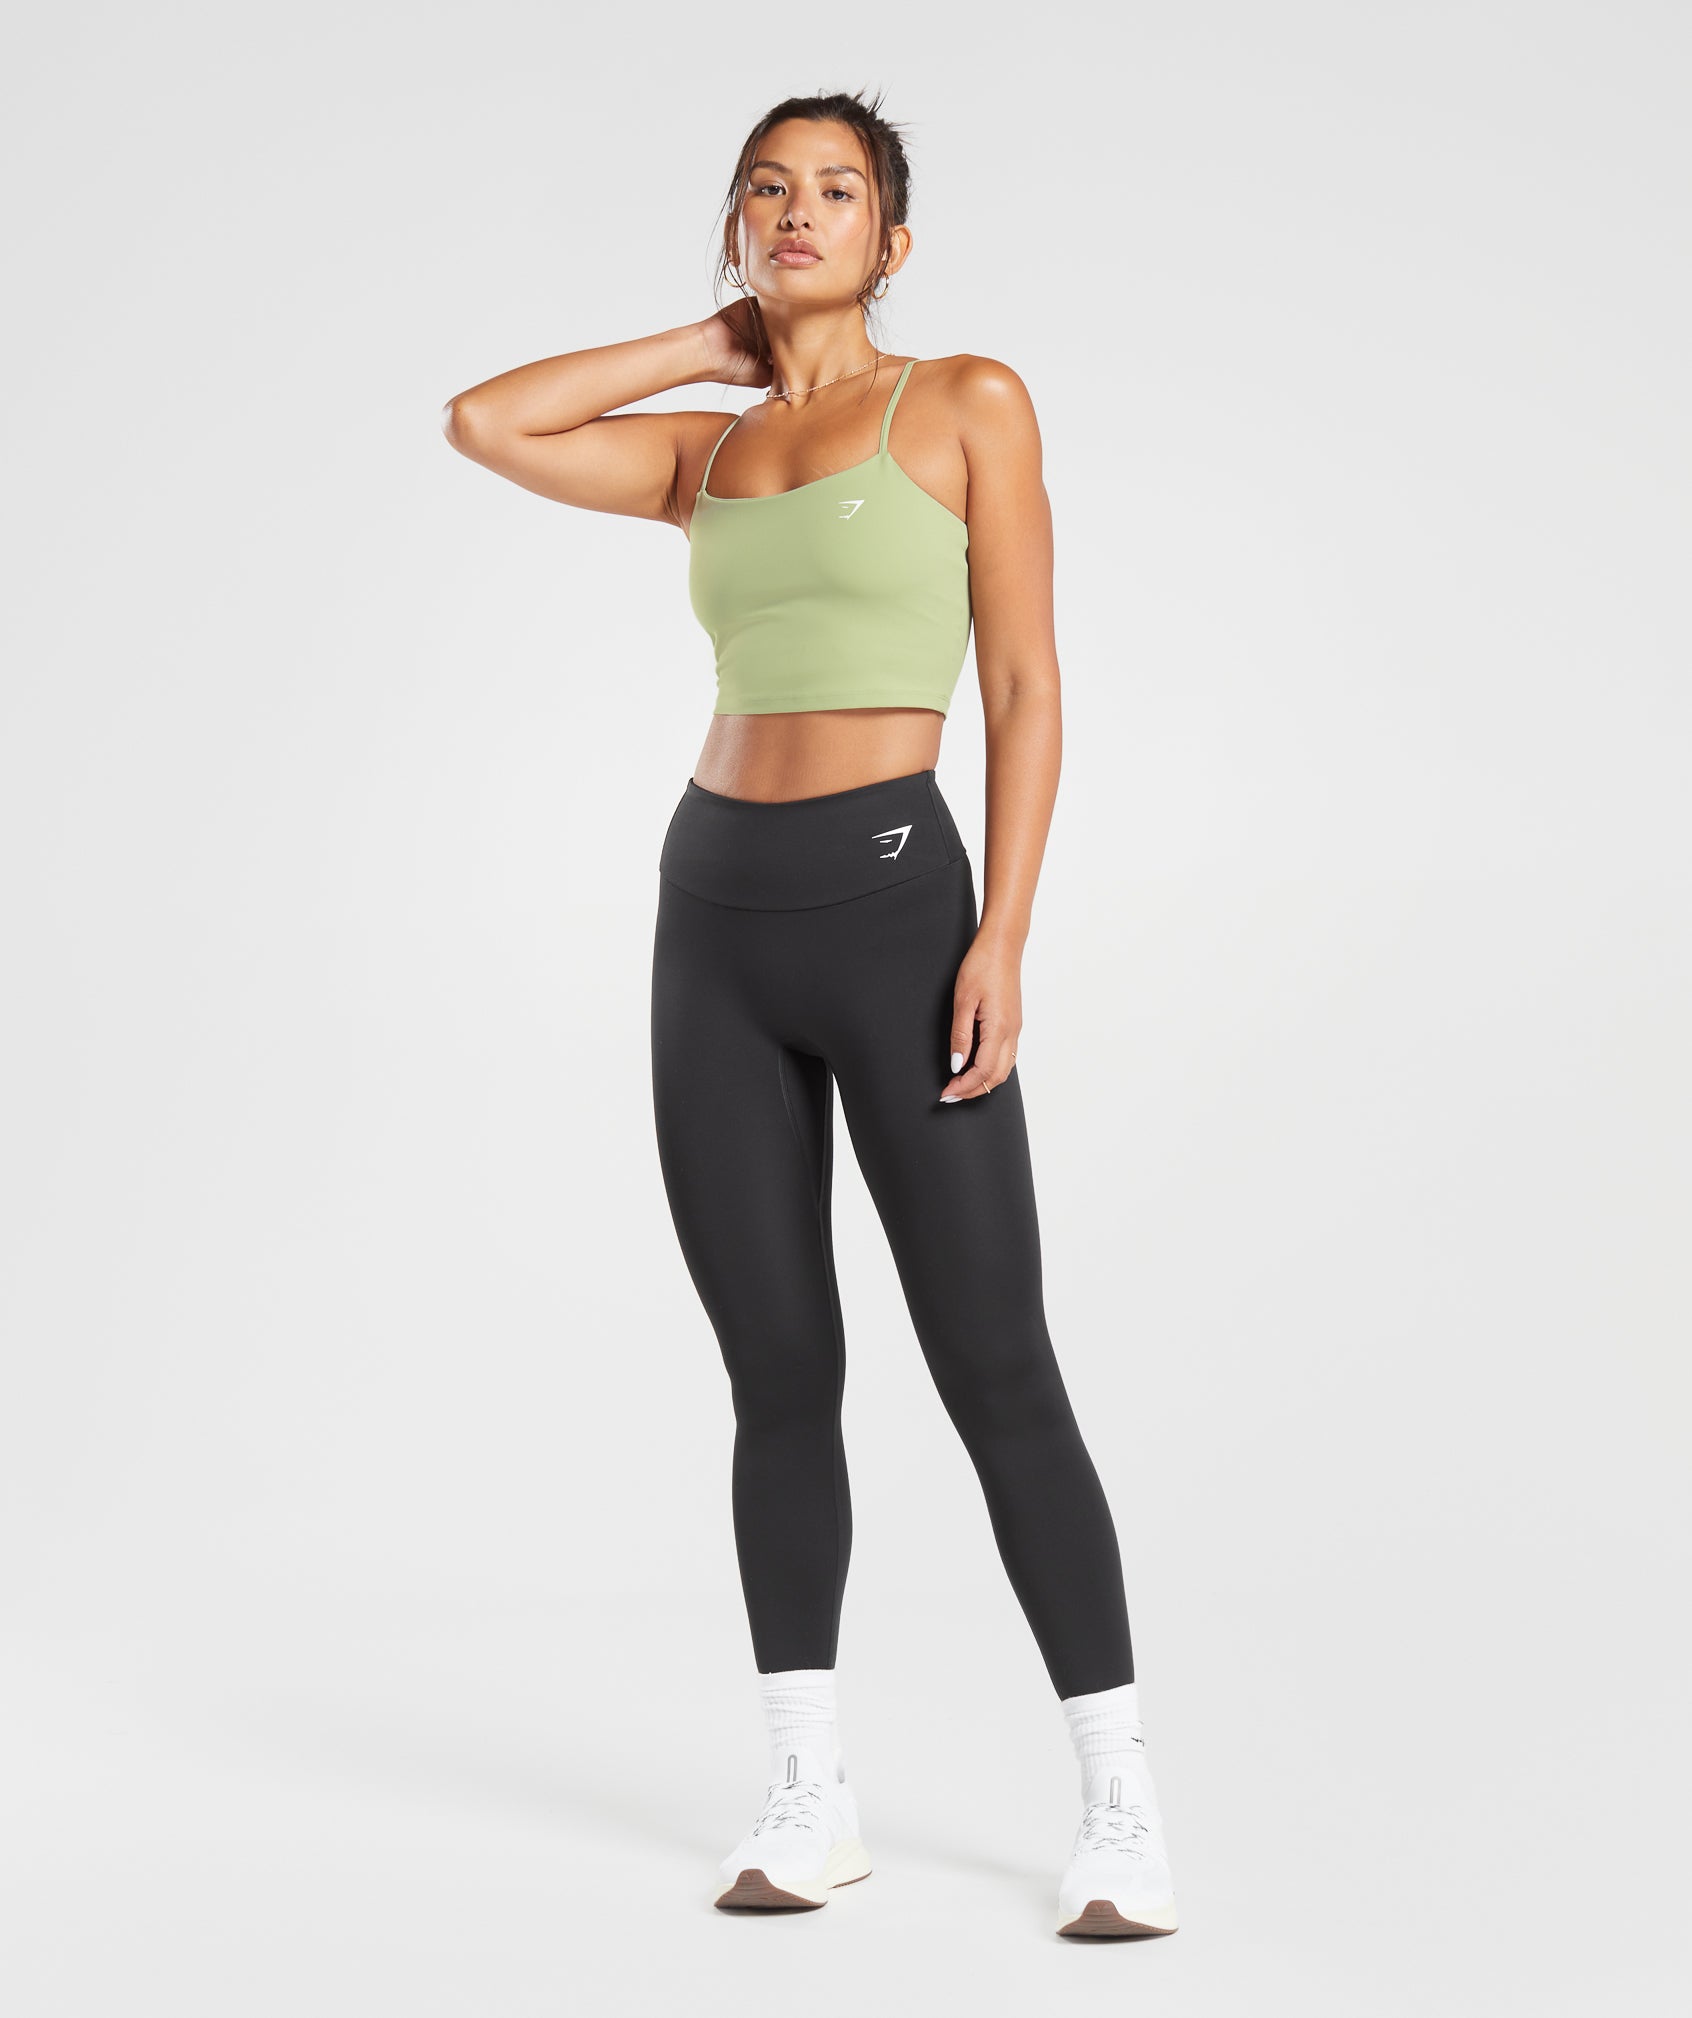 Strappy Crop Cami Tank in Light Sage Green - view 4